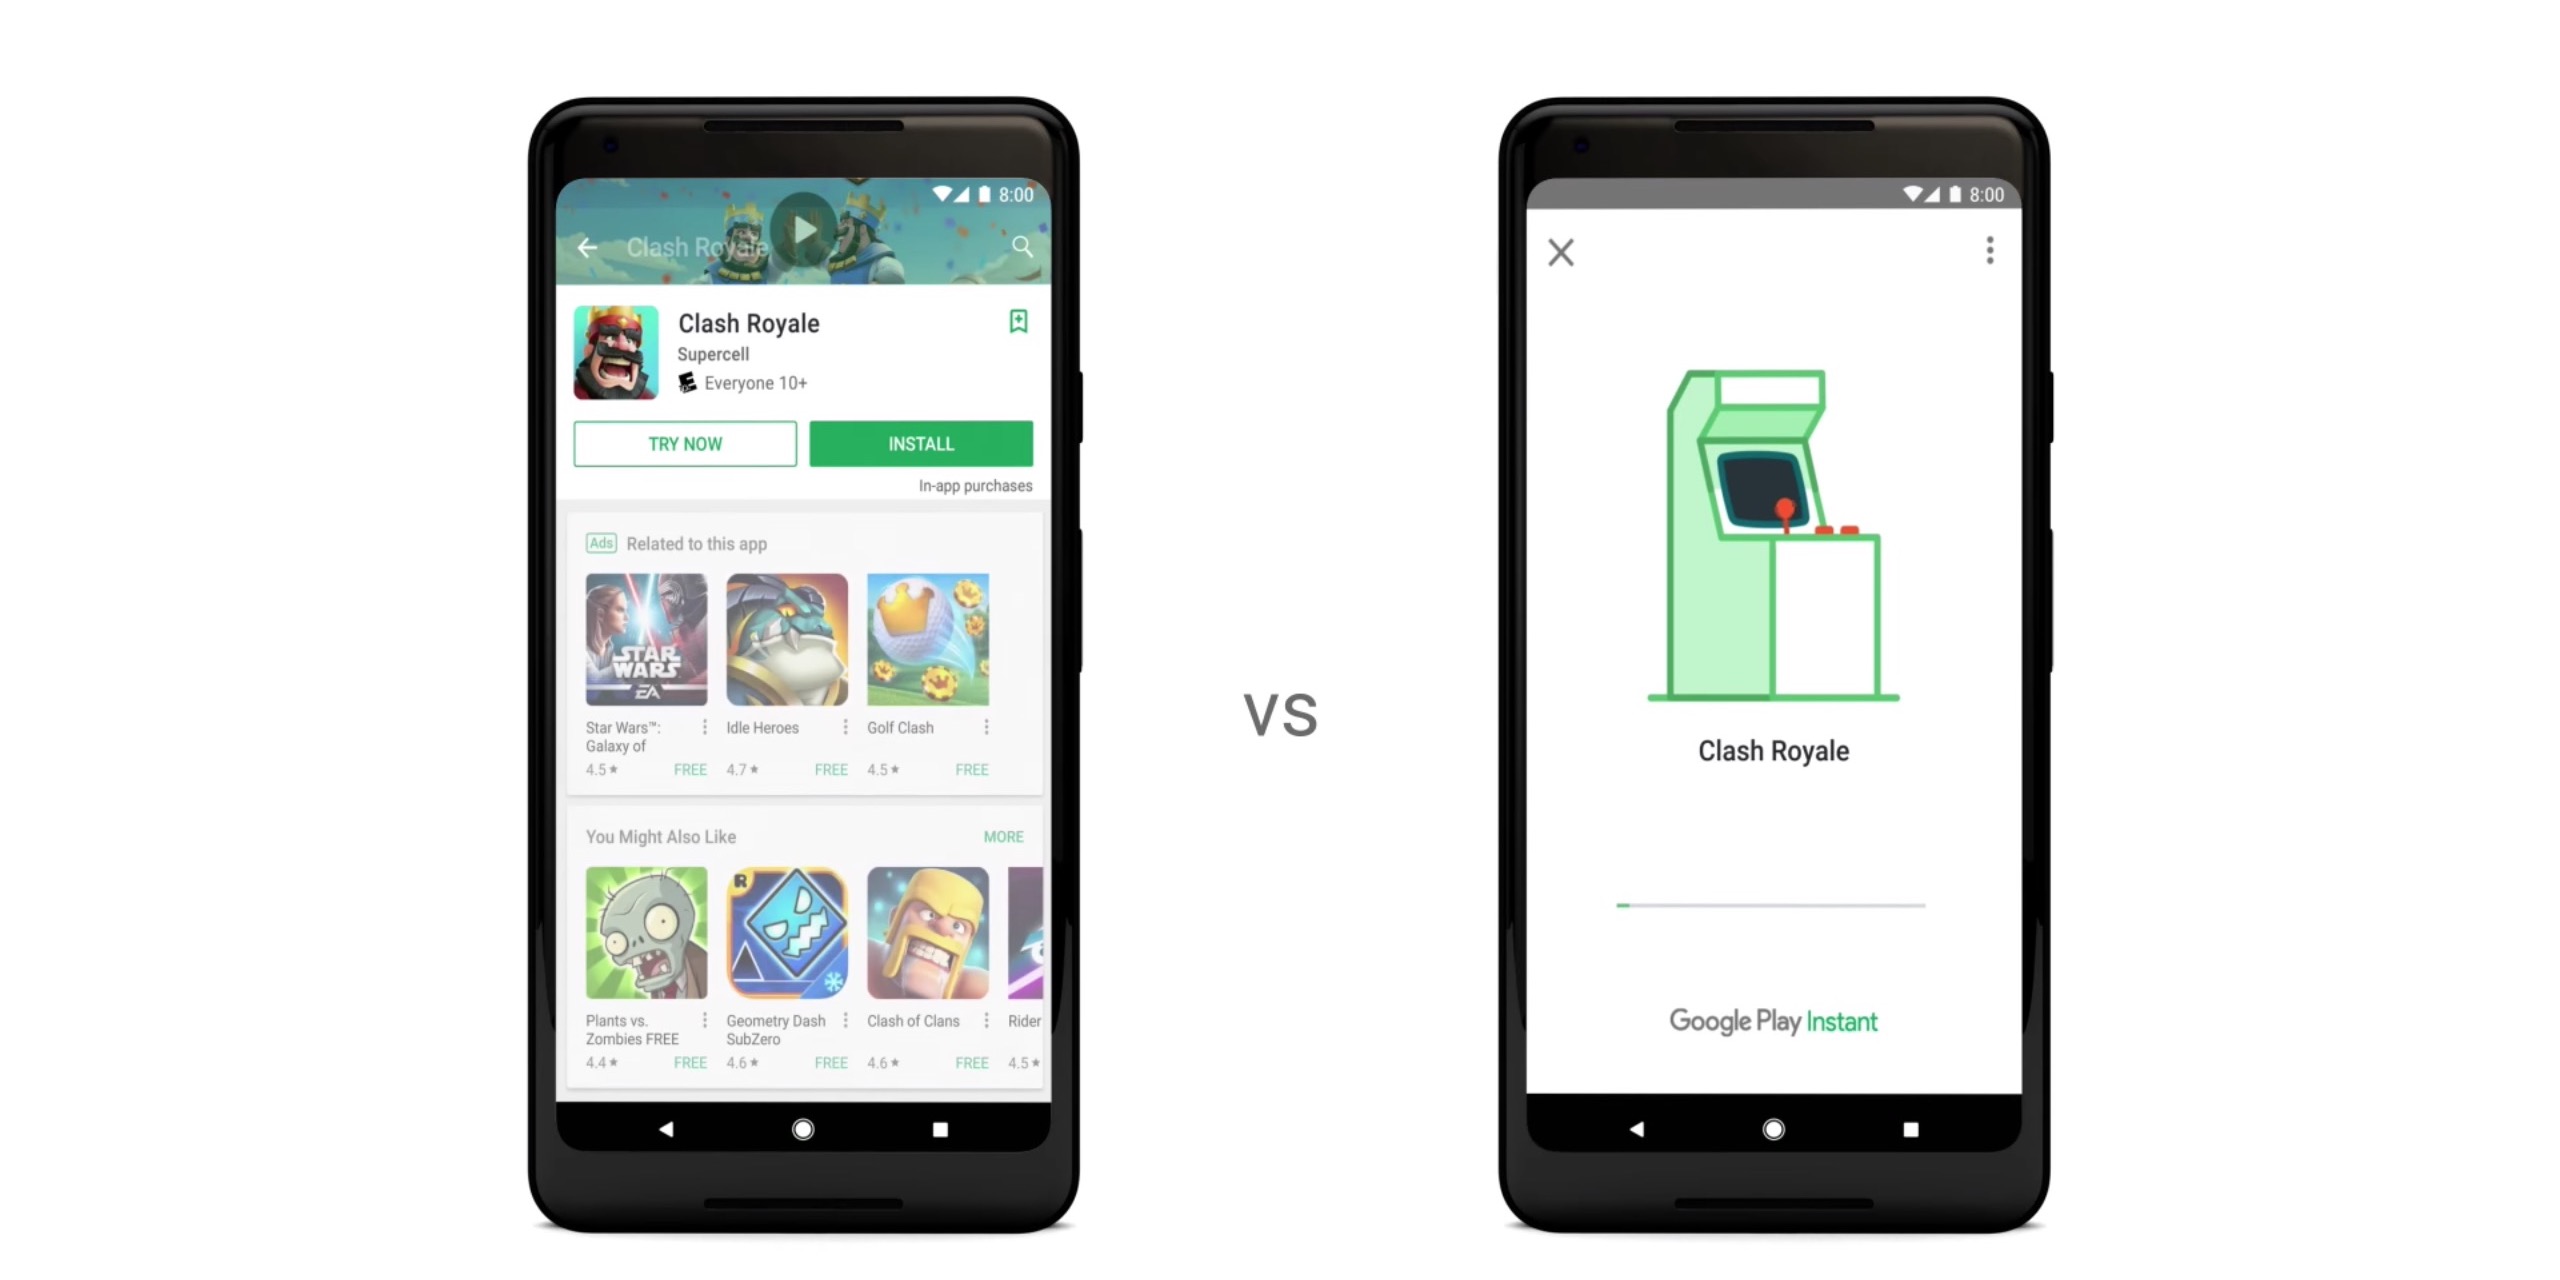 Google Play Instant for Android will allow users to try a game